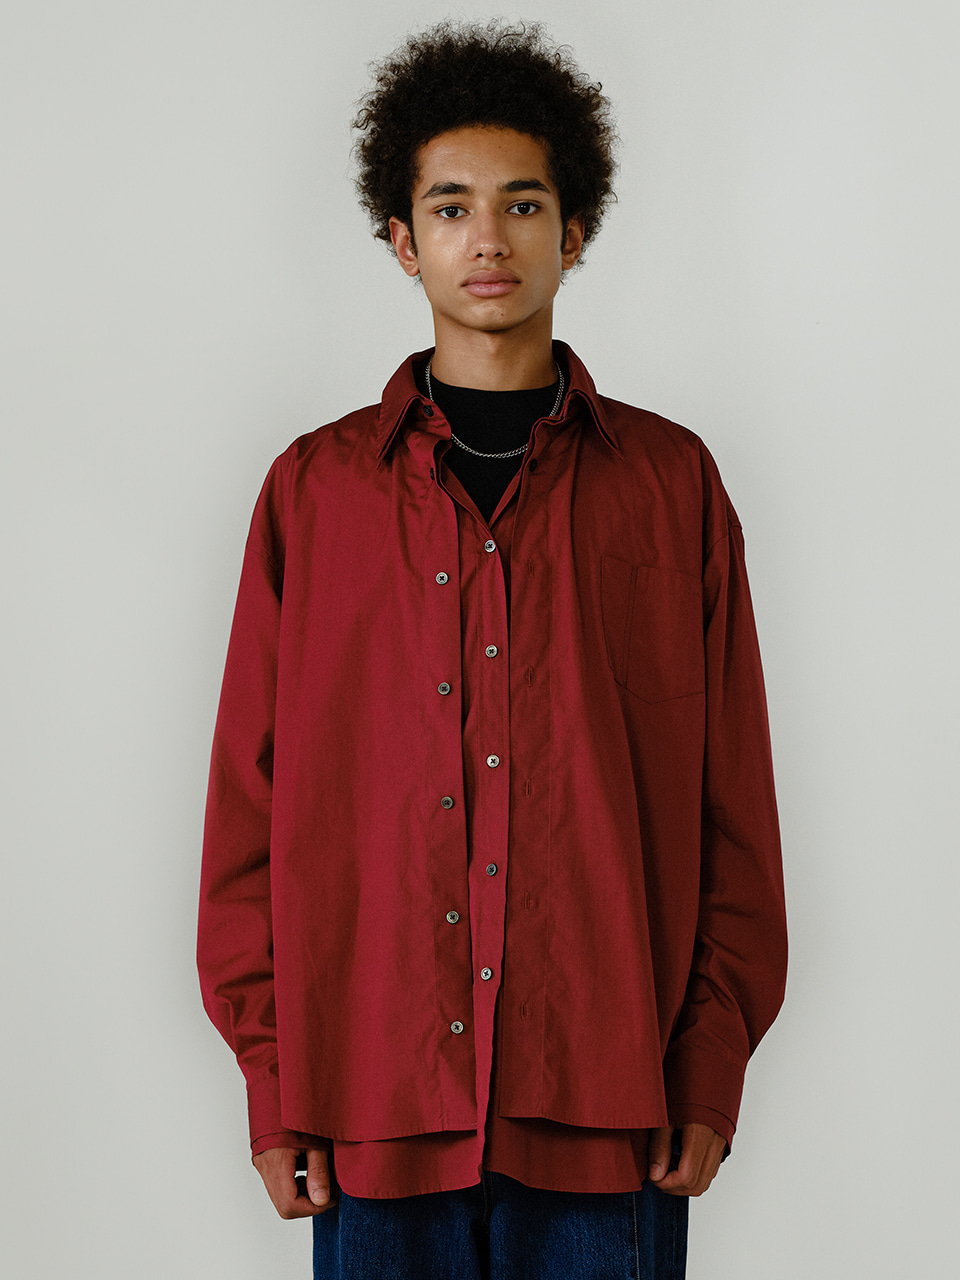 IEY - DOUBLE LAYERED SHIRTS Wine Red